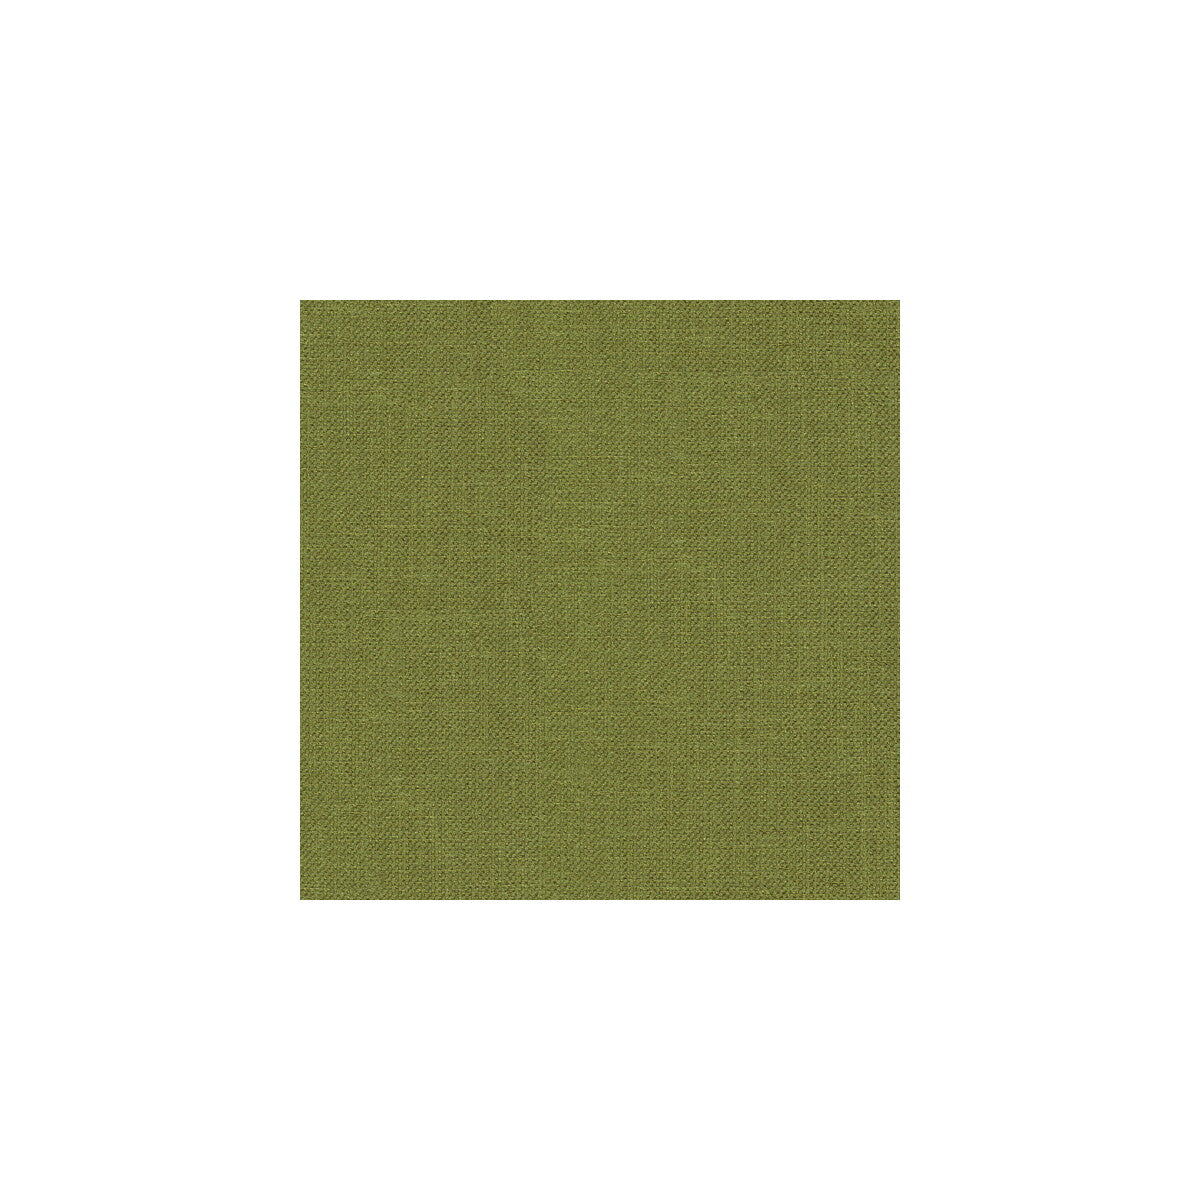 Kravet Basics fabric in 33120-3 color - pattern 33120.3.0 - by Kravet Basics in the Perfect Plains collection